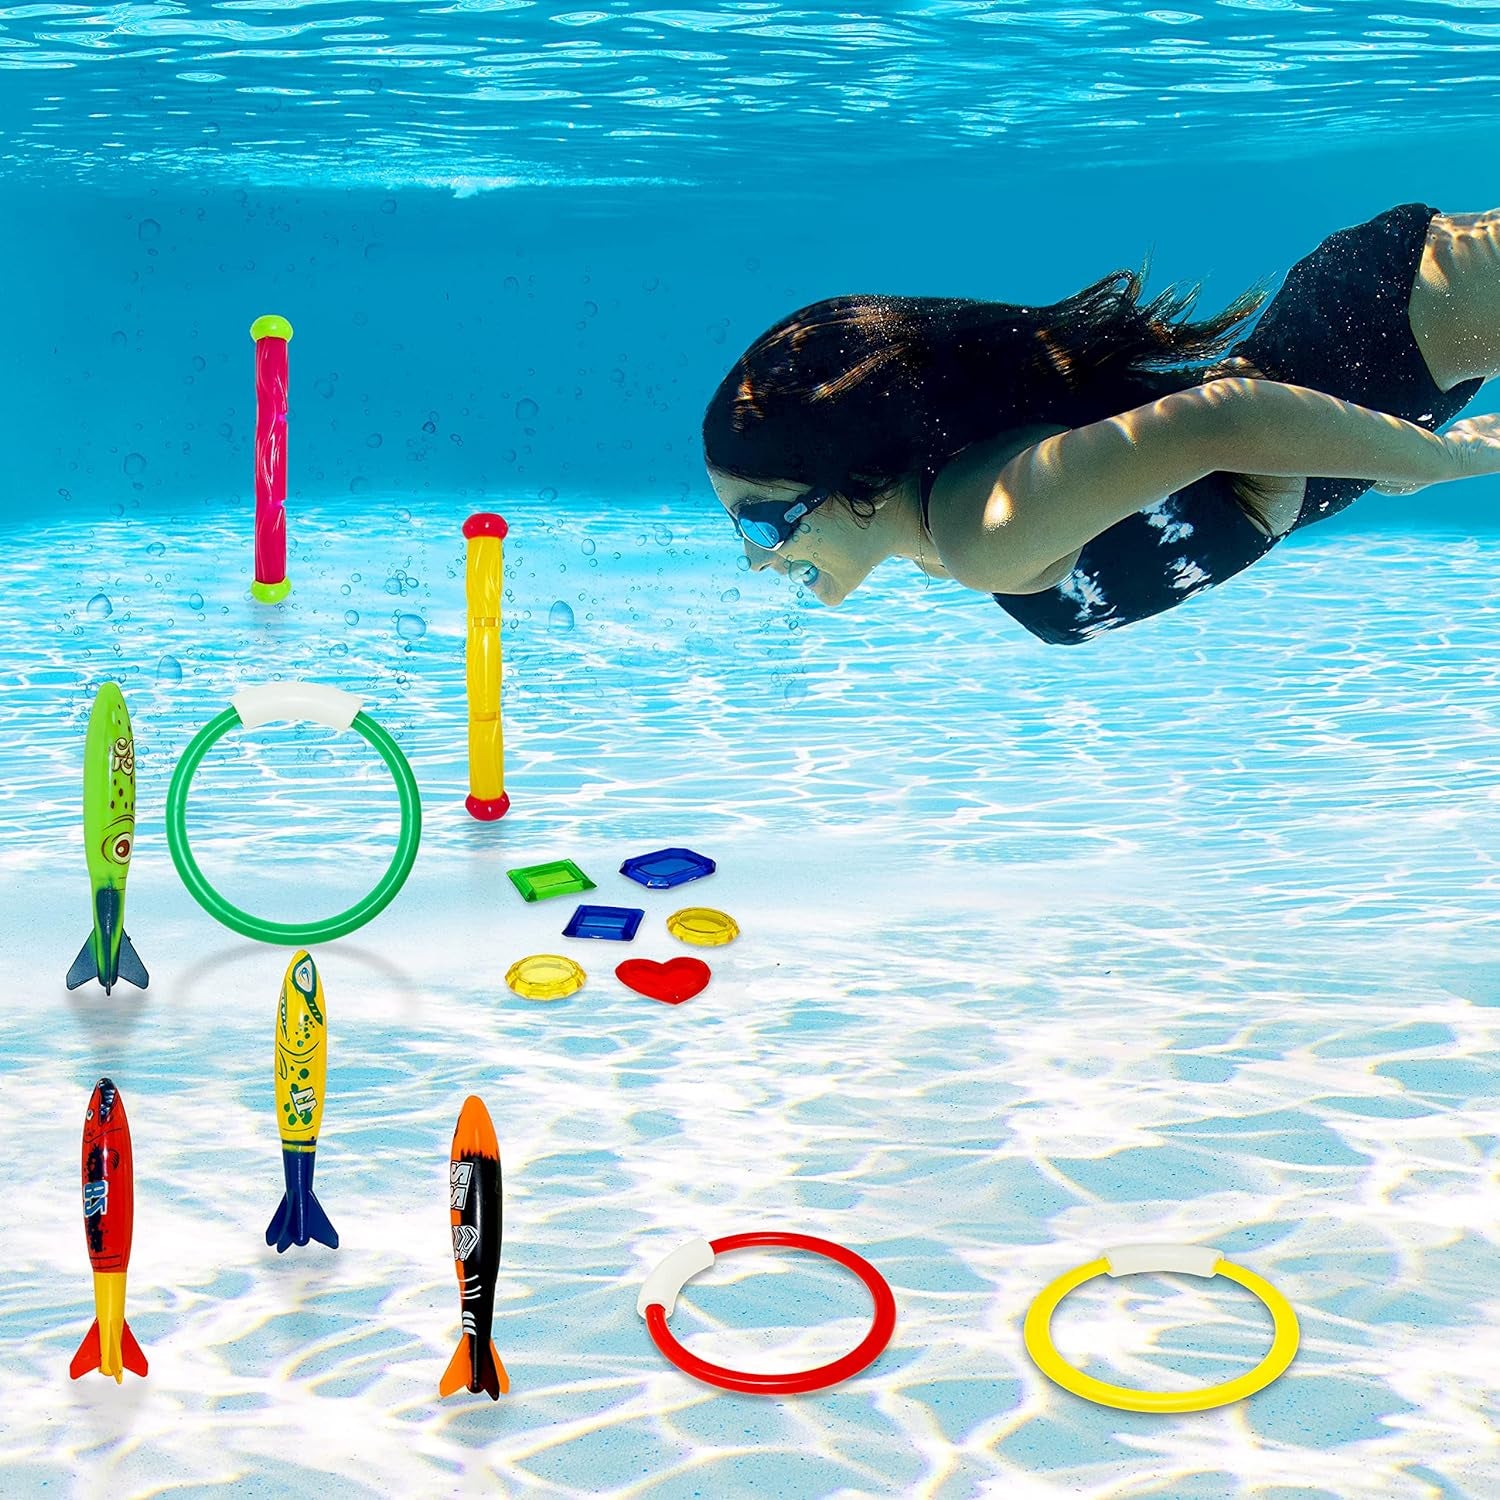 18Pcs Diving Pool Toys for Kids, Swimming Pool Toy with Storage Bag Includes 4 Pool Rings, 4 Diving Sticks, 4 Bandits, 6 Treasures Underwater Swim Pool Games for Ages 8-12